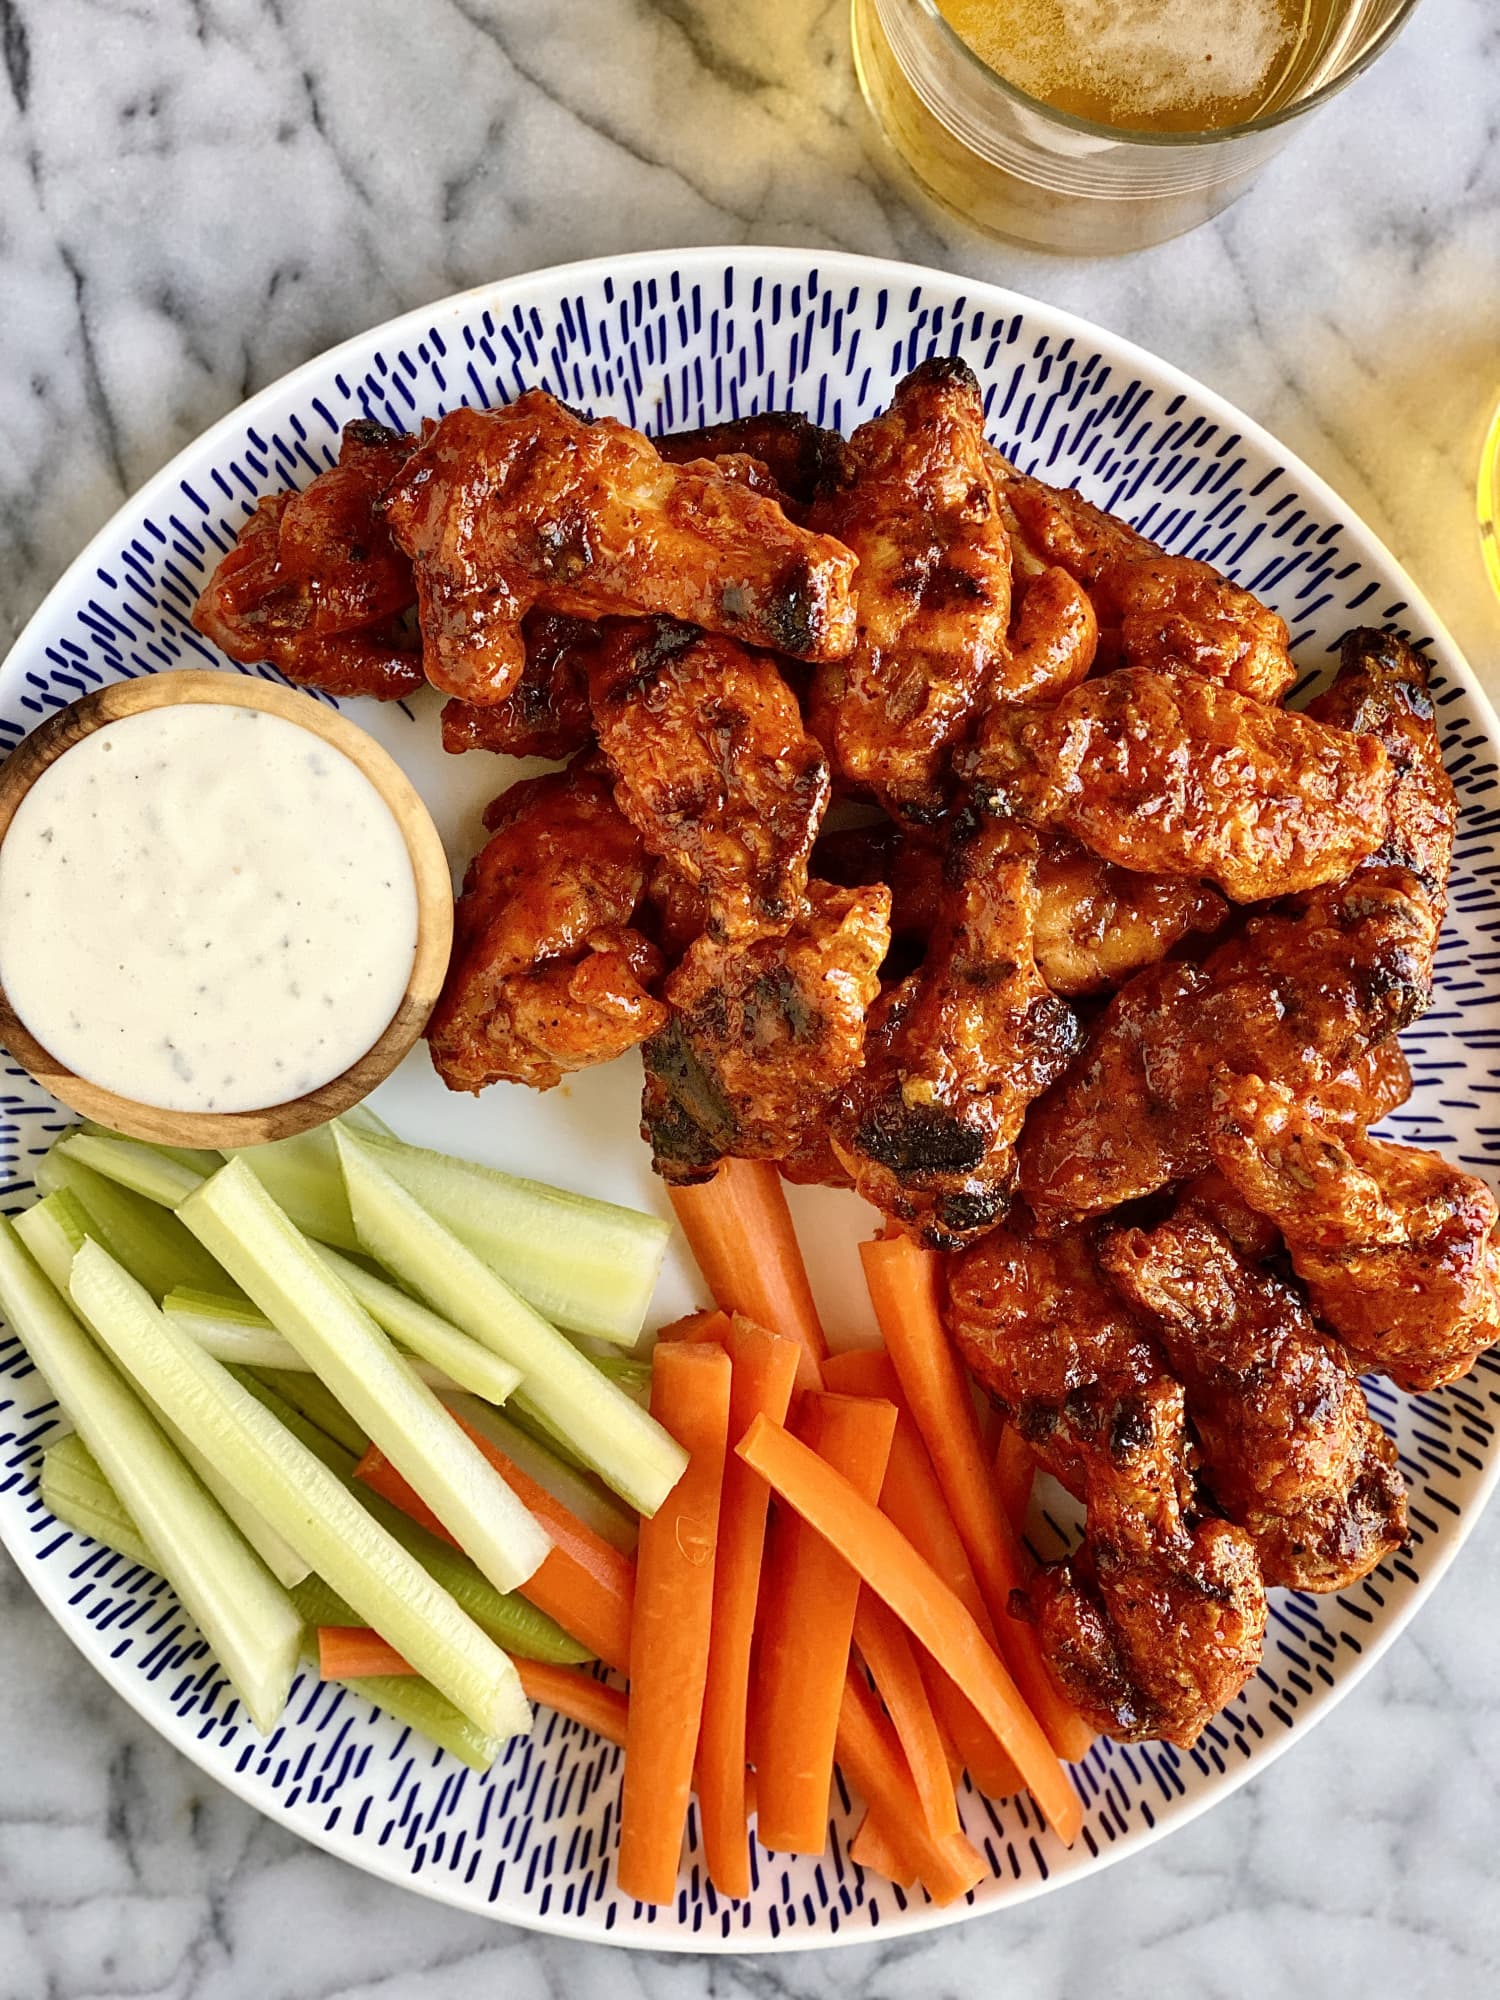 This Pantry Ingredient Is the Best Way to Get Extra-Crispy Grilled Wings